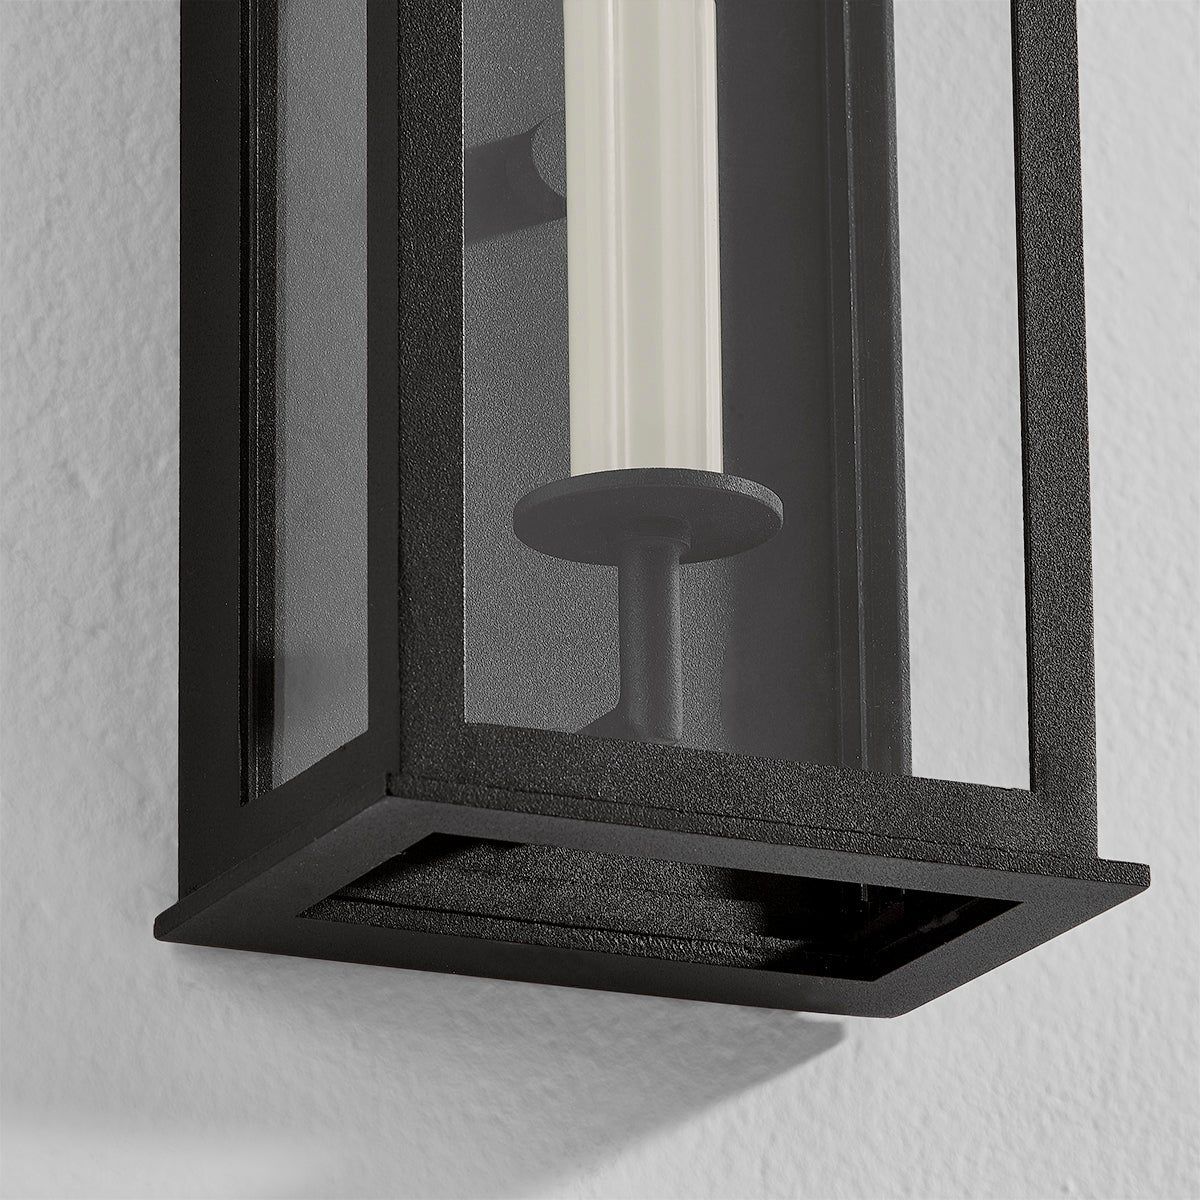 Gridley 1-Light Wall Sconce